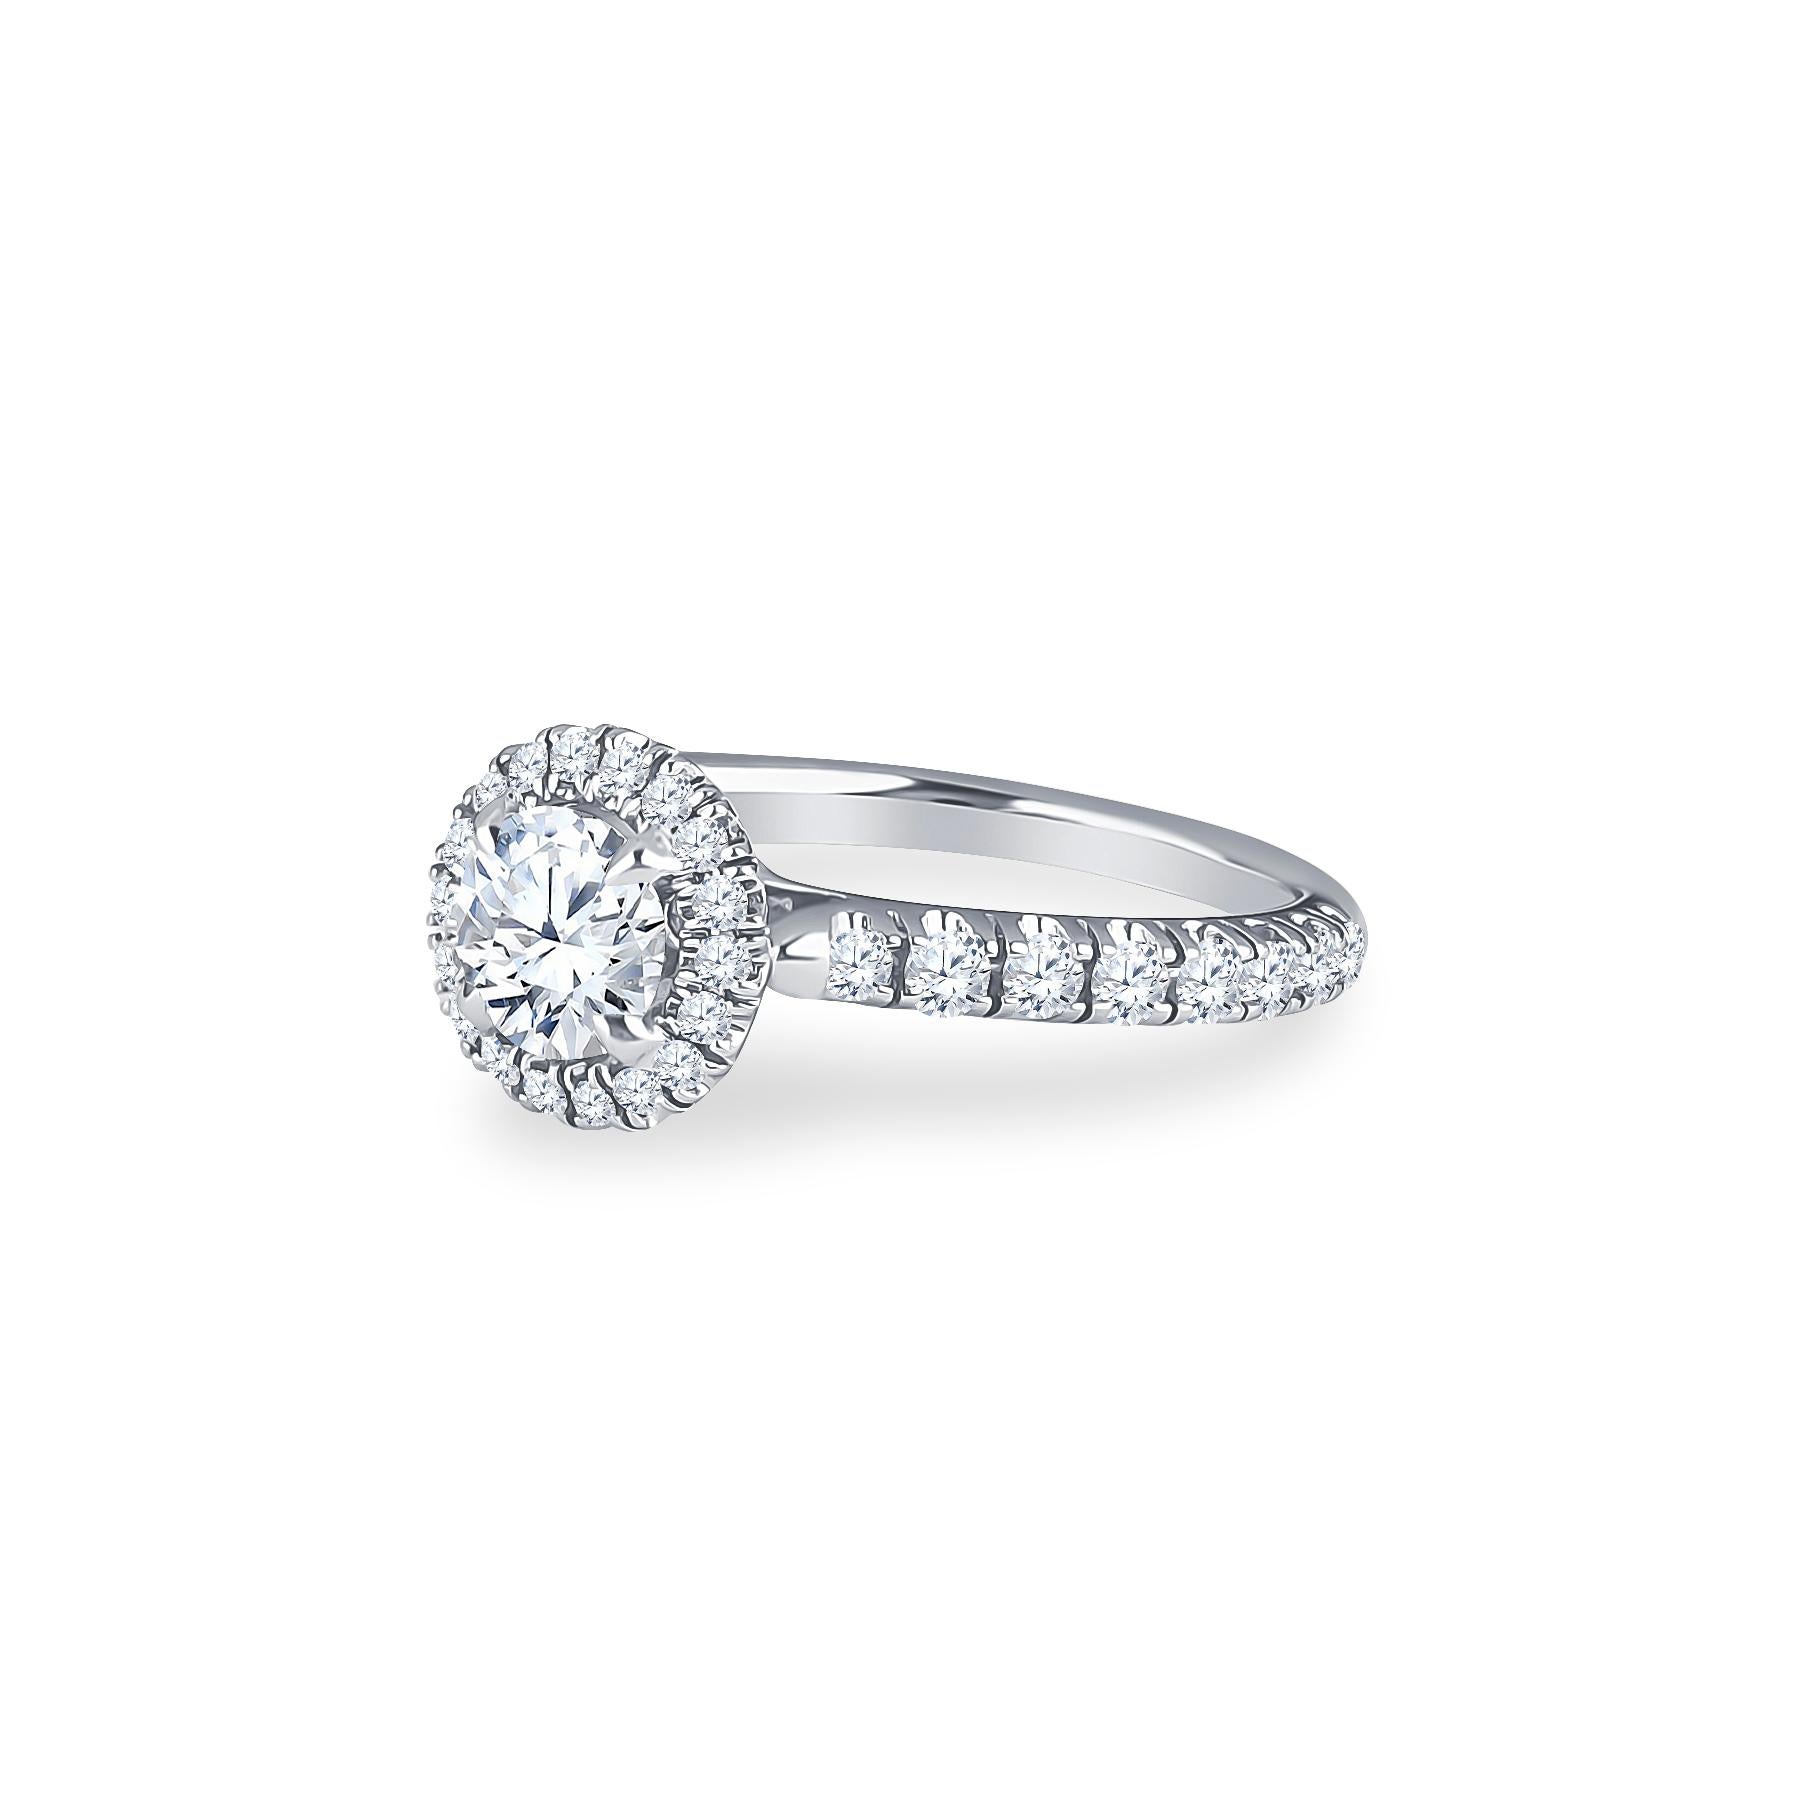 Cartier Destinee solitaire engagement ring with 0.50 carats round center stone. Size 3.75, size is adjustable to larger or smaller. Diamond clarity VVS1, grade color G.